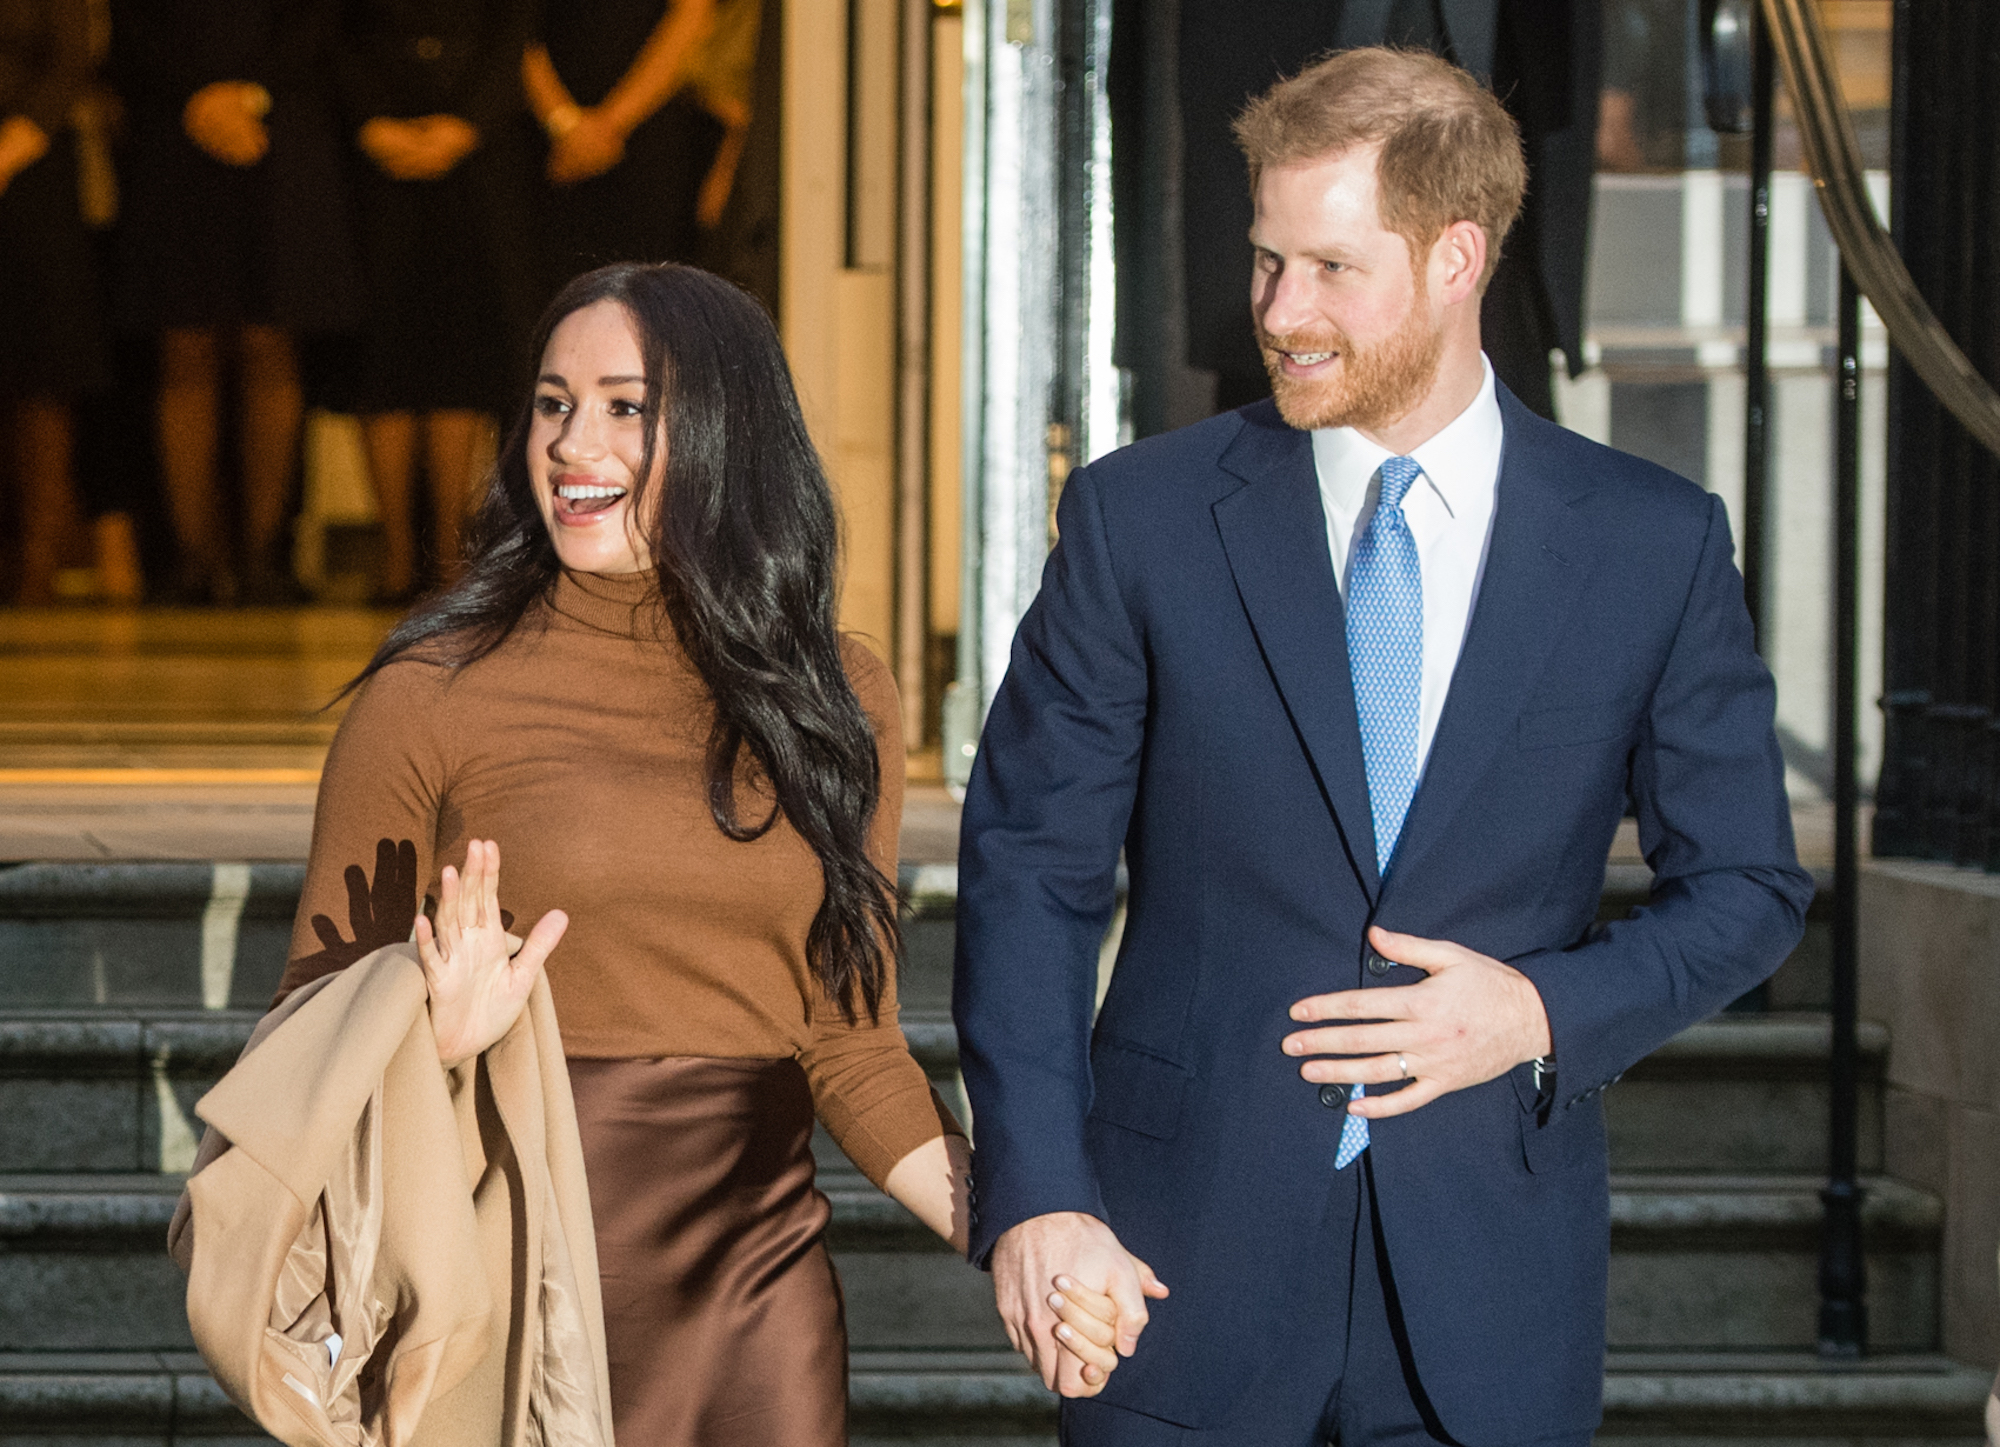 Meghan Markle and Prince Harry, smiling, turned to the side